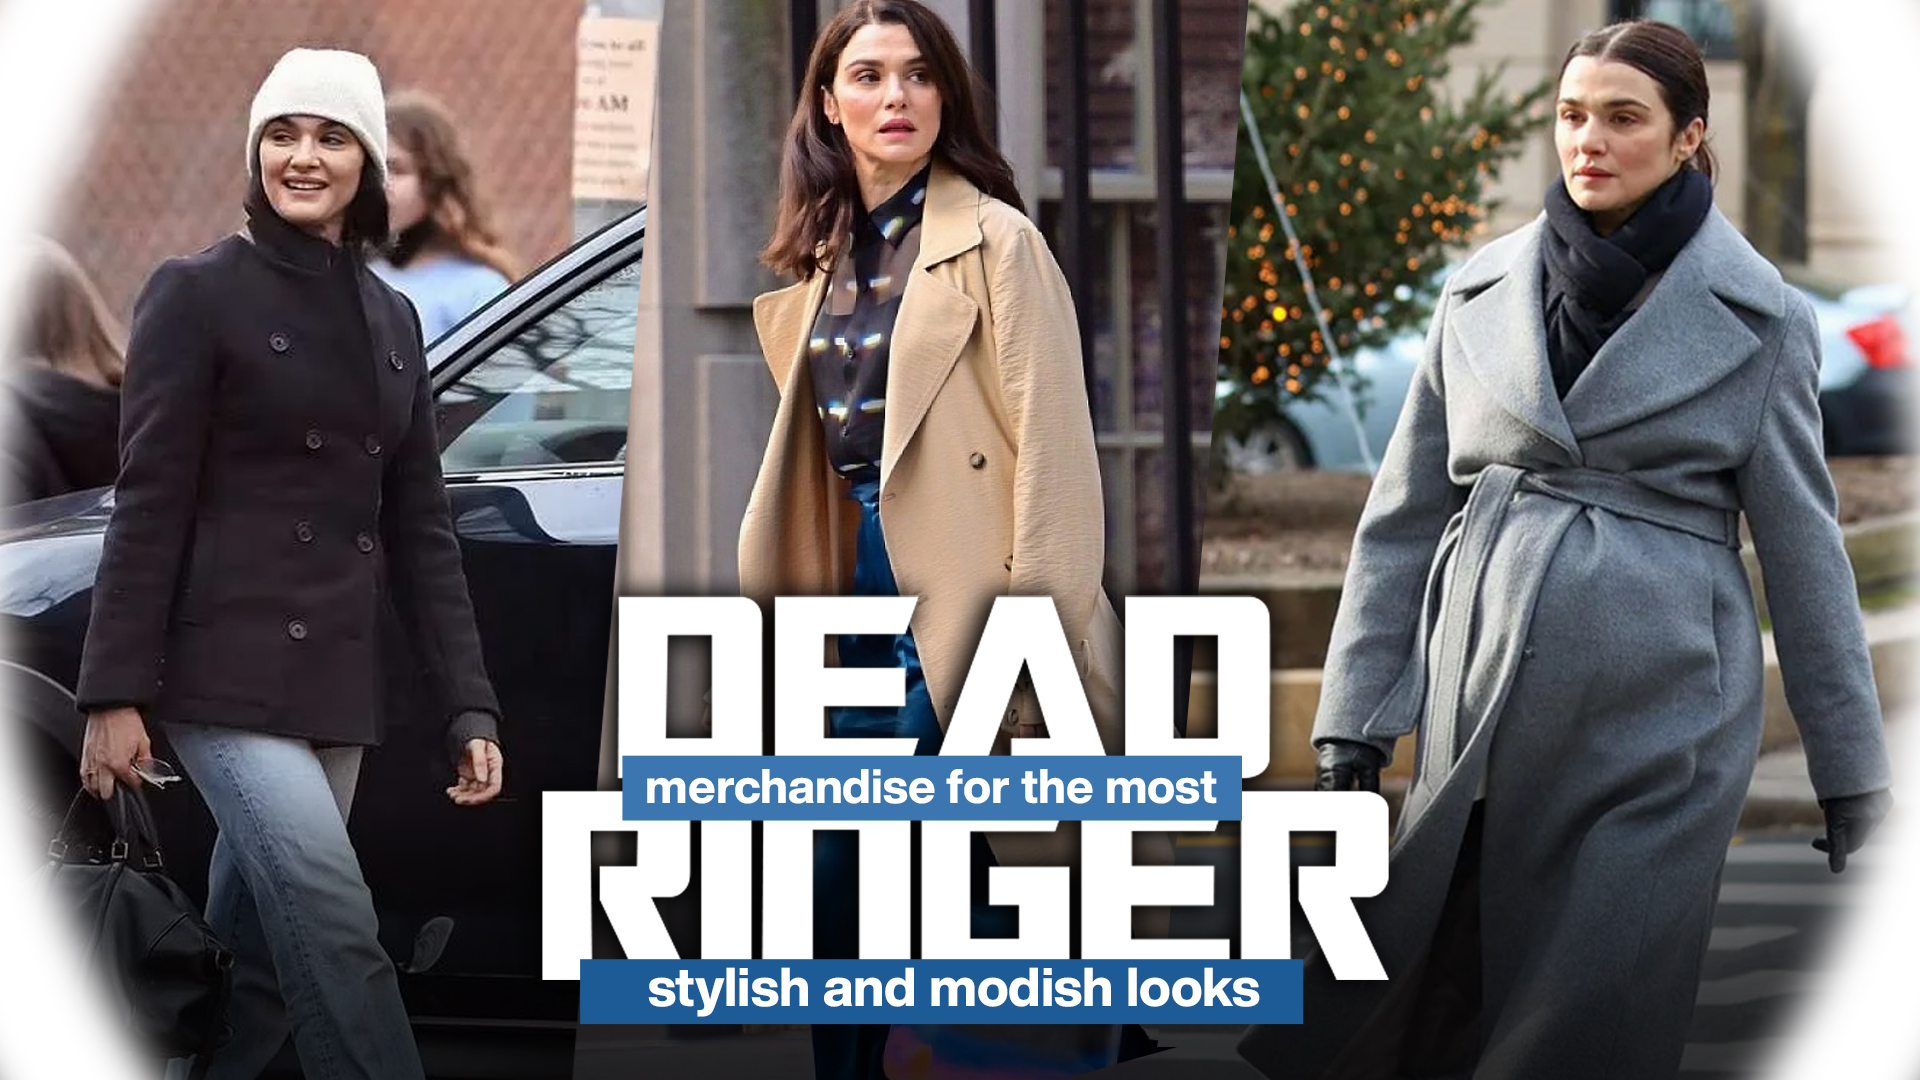 Dead Ringers Series merchandise for the most stylish and modish looks